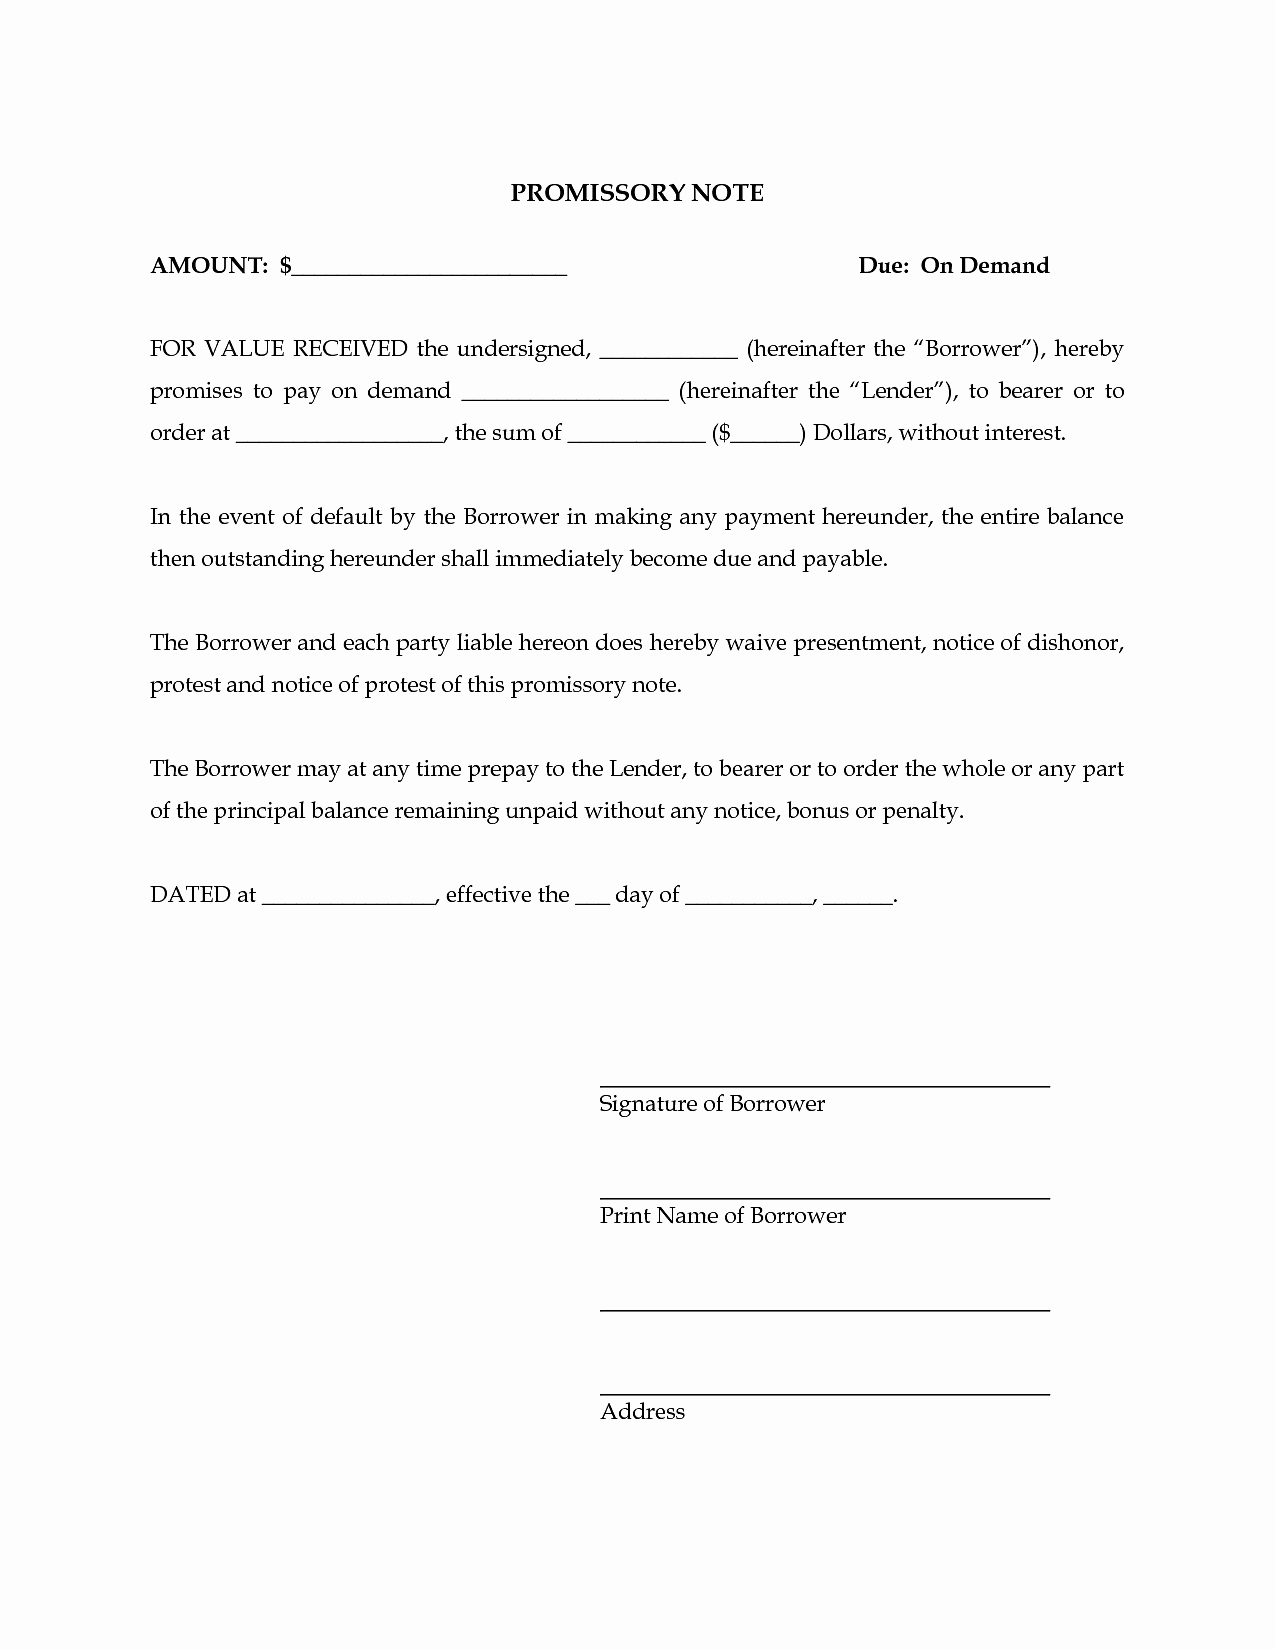 Promissory Note Template California Inspirational Basic Promissory Note Example Mughals